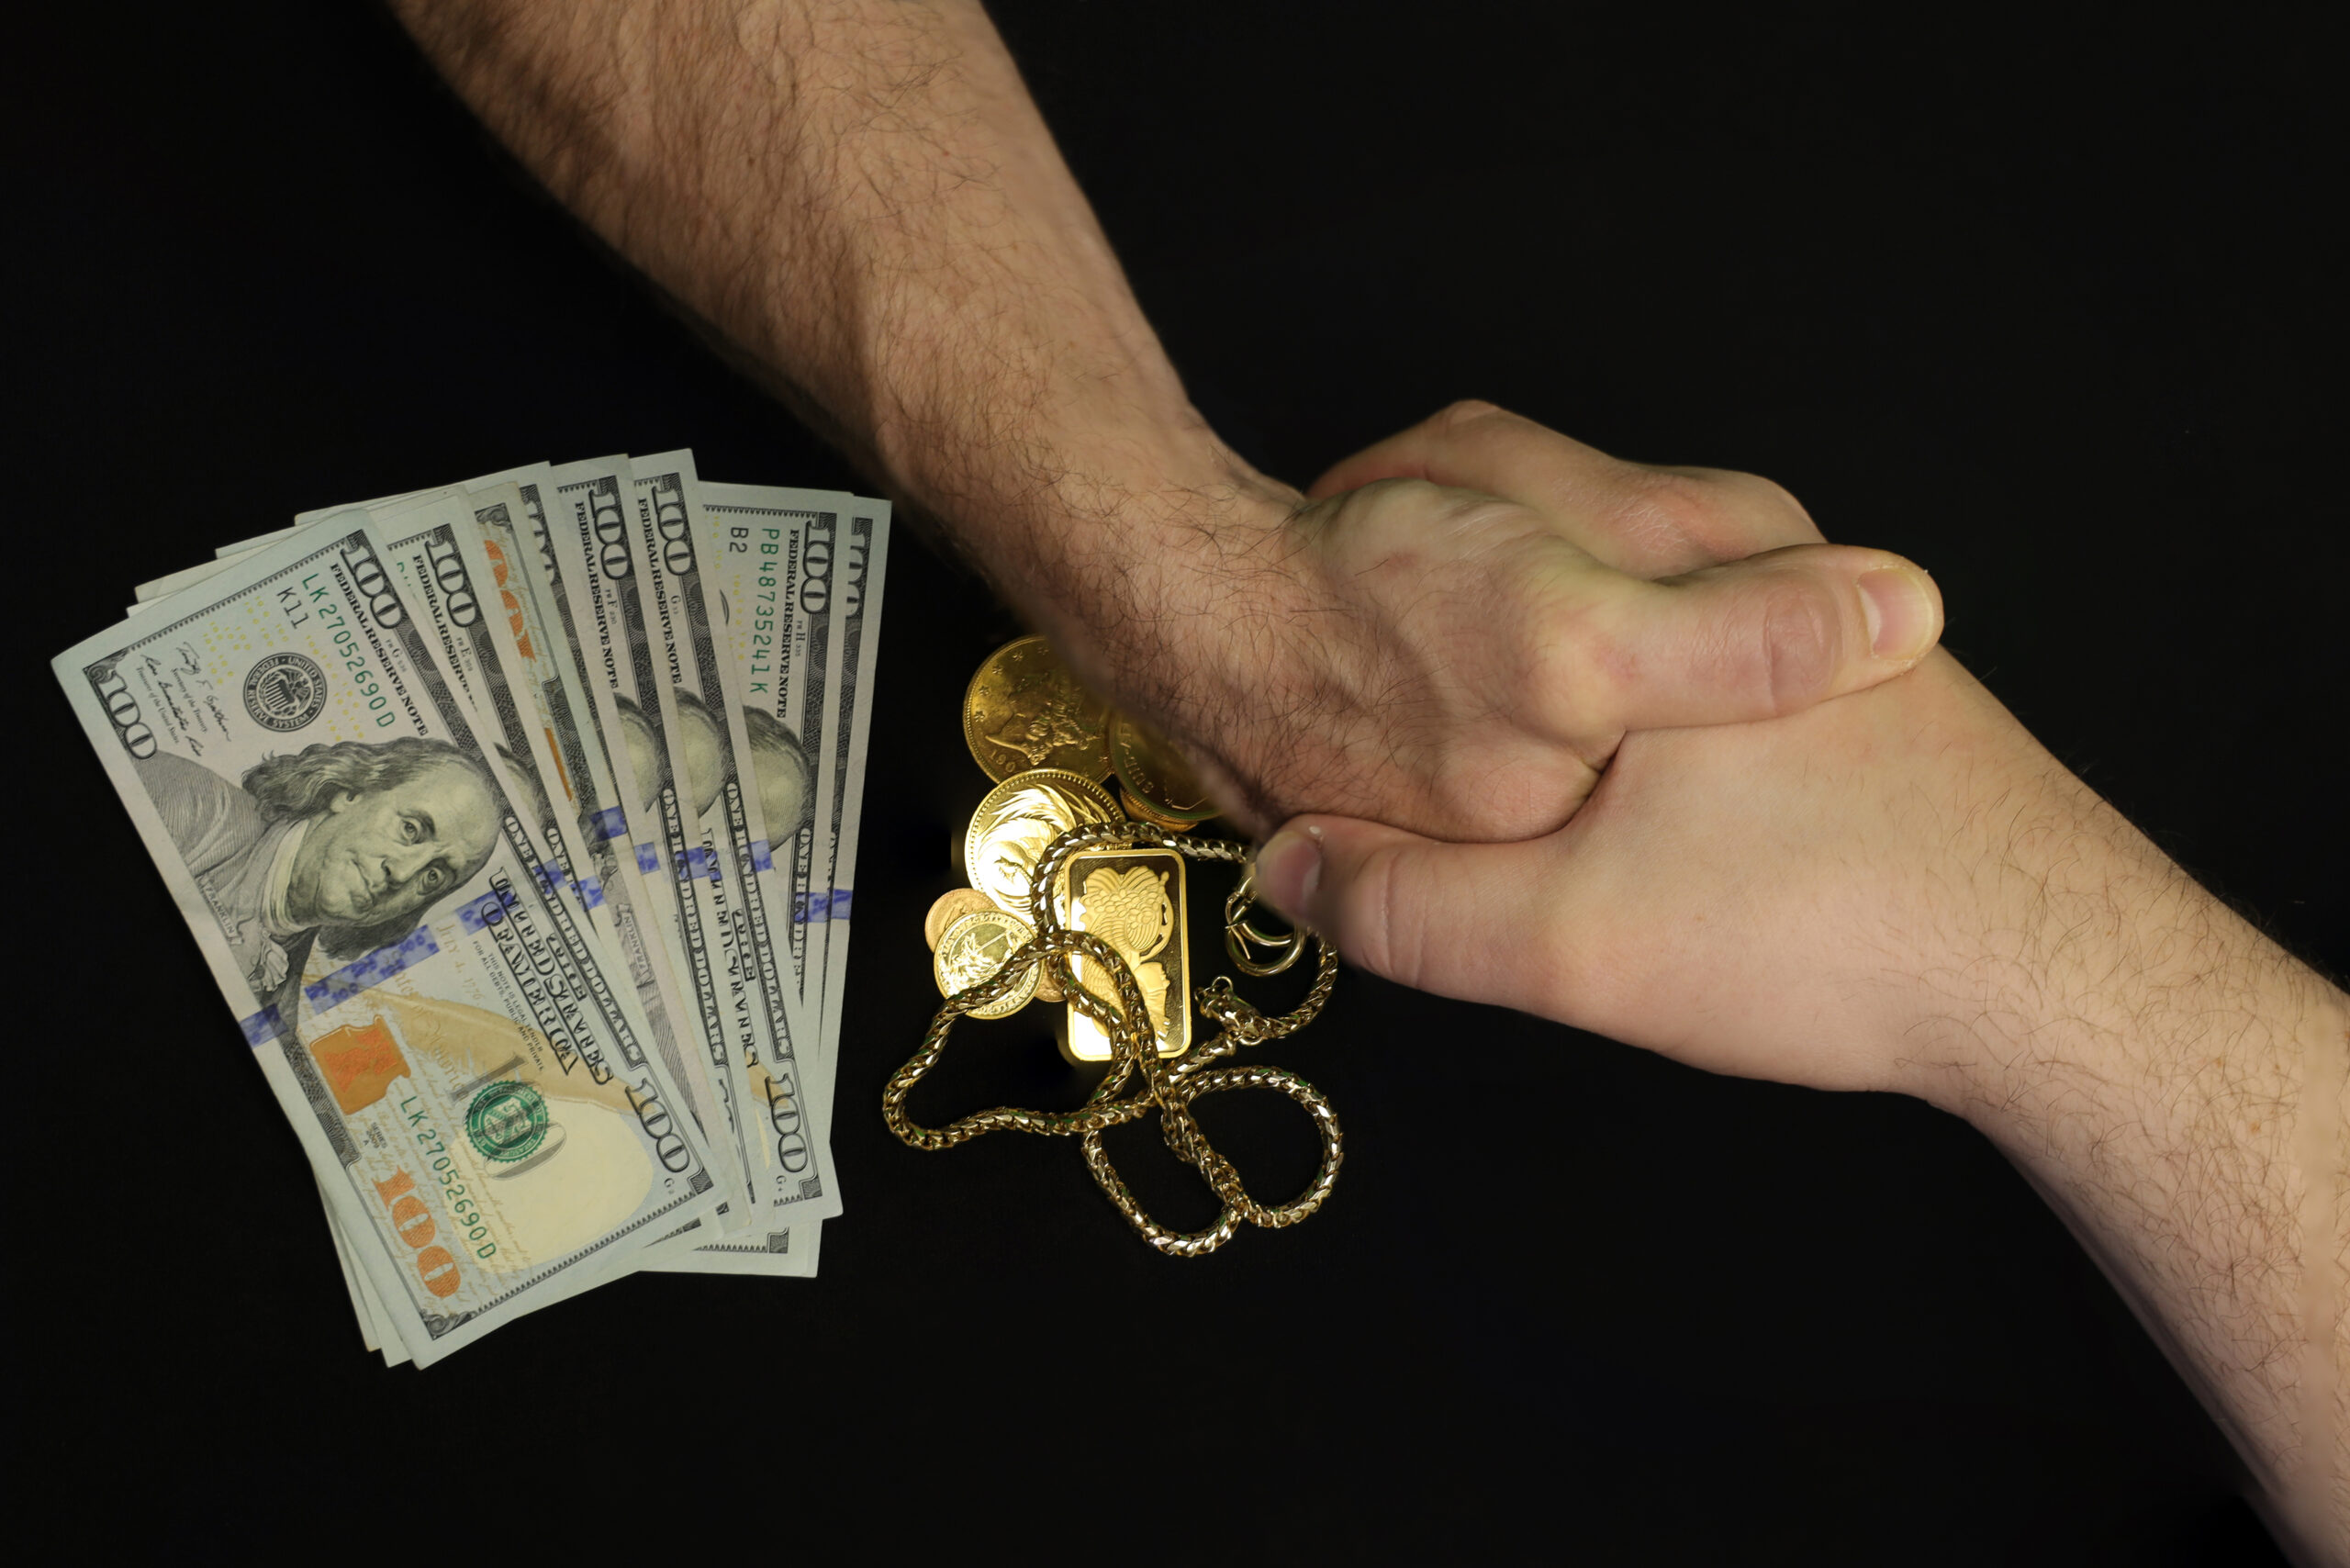 2 hands shaking in a business transaction for gold jewelry